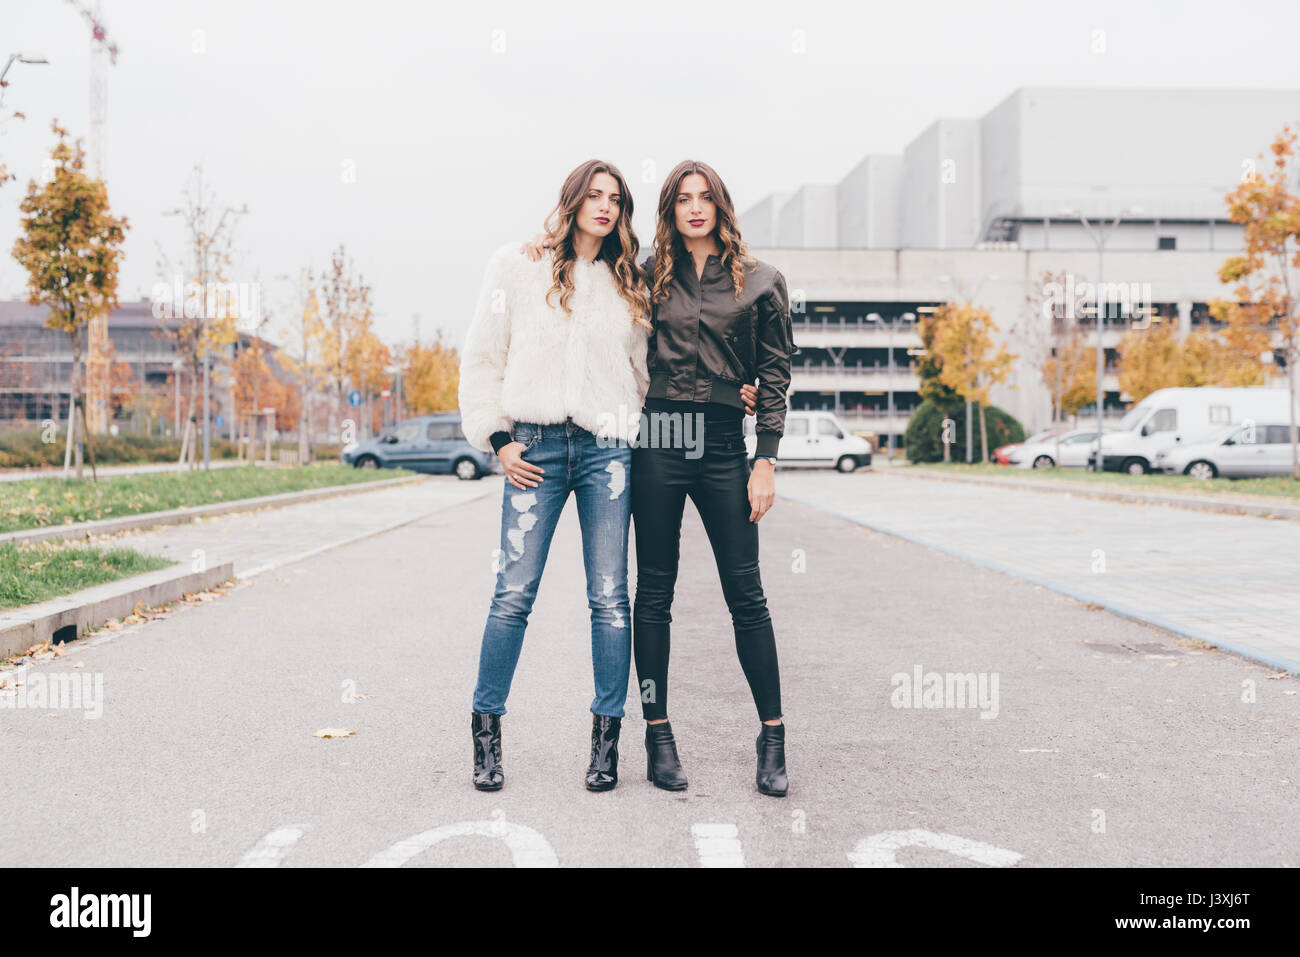 Portrait of twin sisters, in urban area, standing side by side Stock Photo